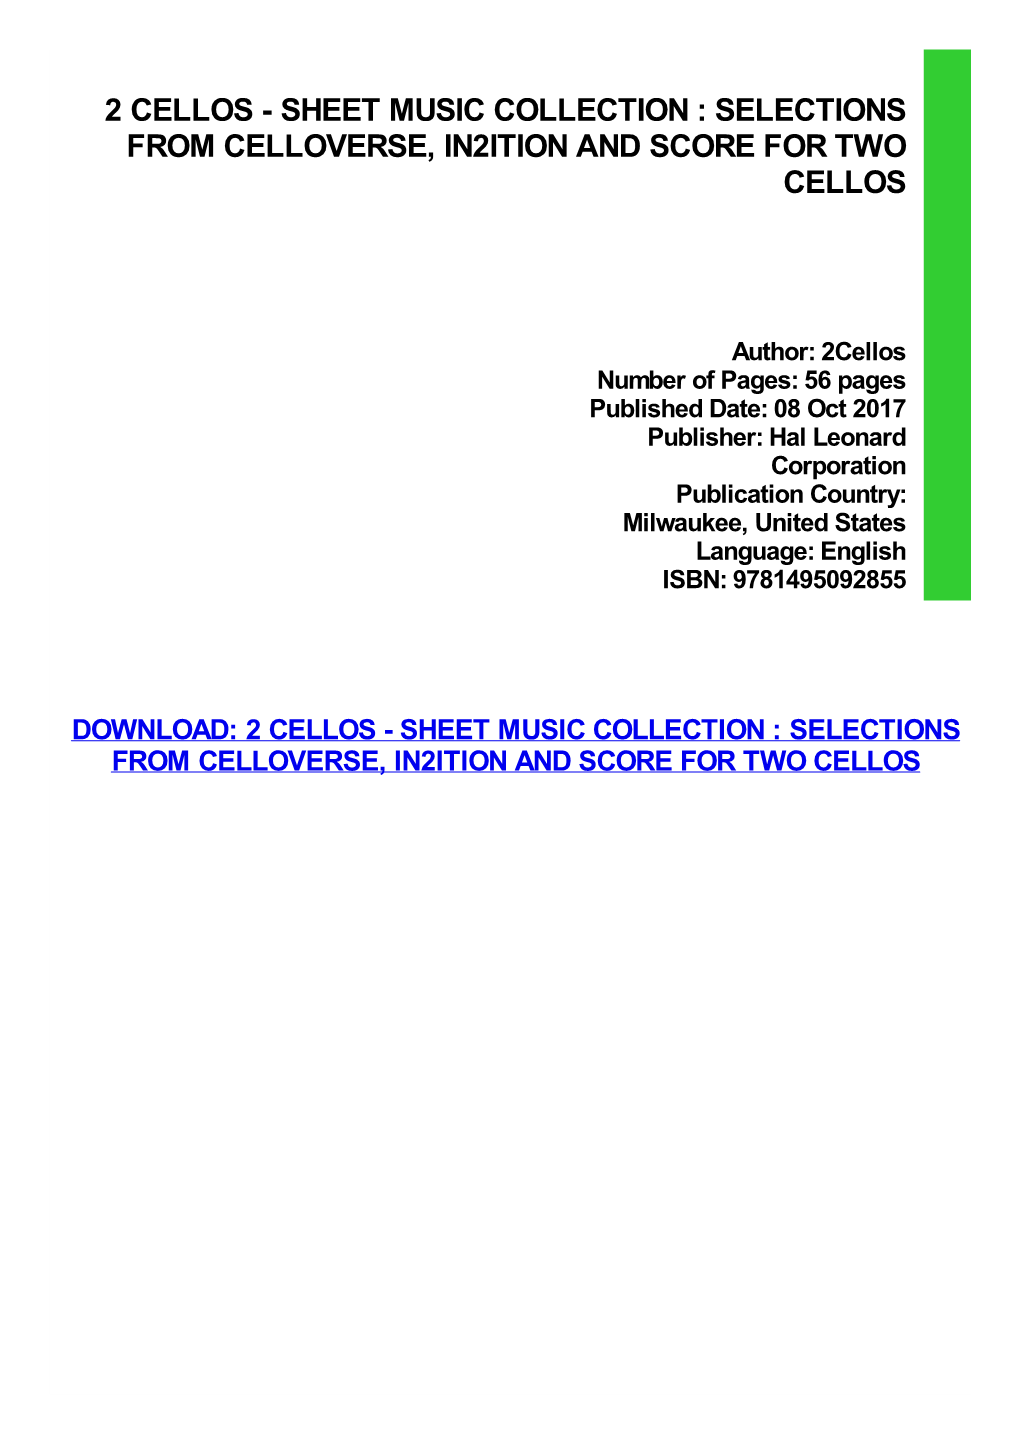 Sheet Music Collection : Selections from Celloverse, In2ition and Score for Two Cellos